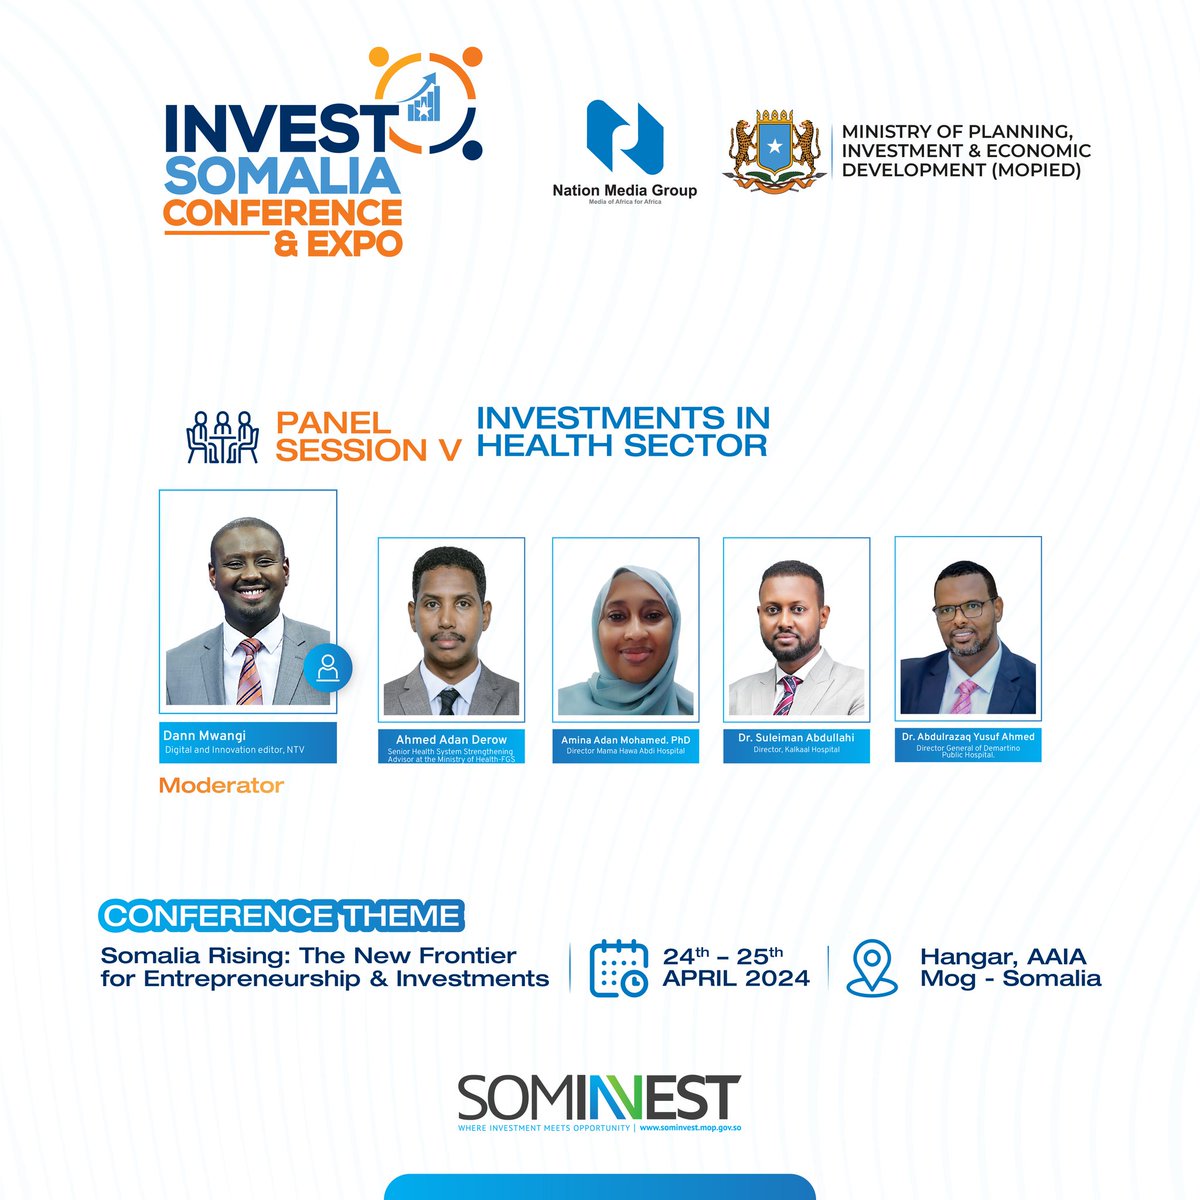 Join the fifth and final panel discussion on Investments in the Health Sector during the second day of the #InvestSomalia2024 in Mogadishu. This is an opportunity to learn about the latest developments and investment opportunities in the health sector.